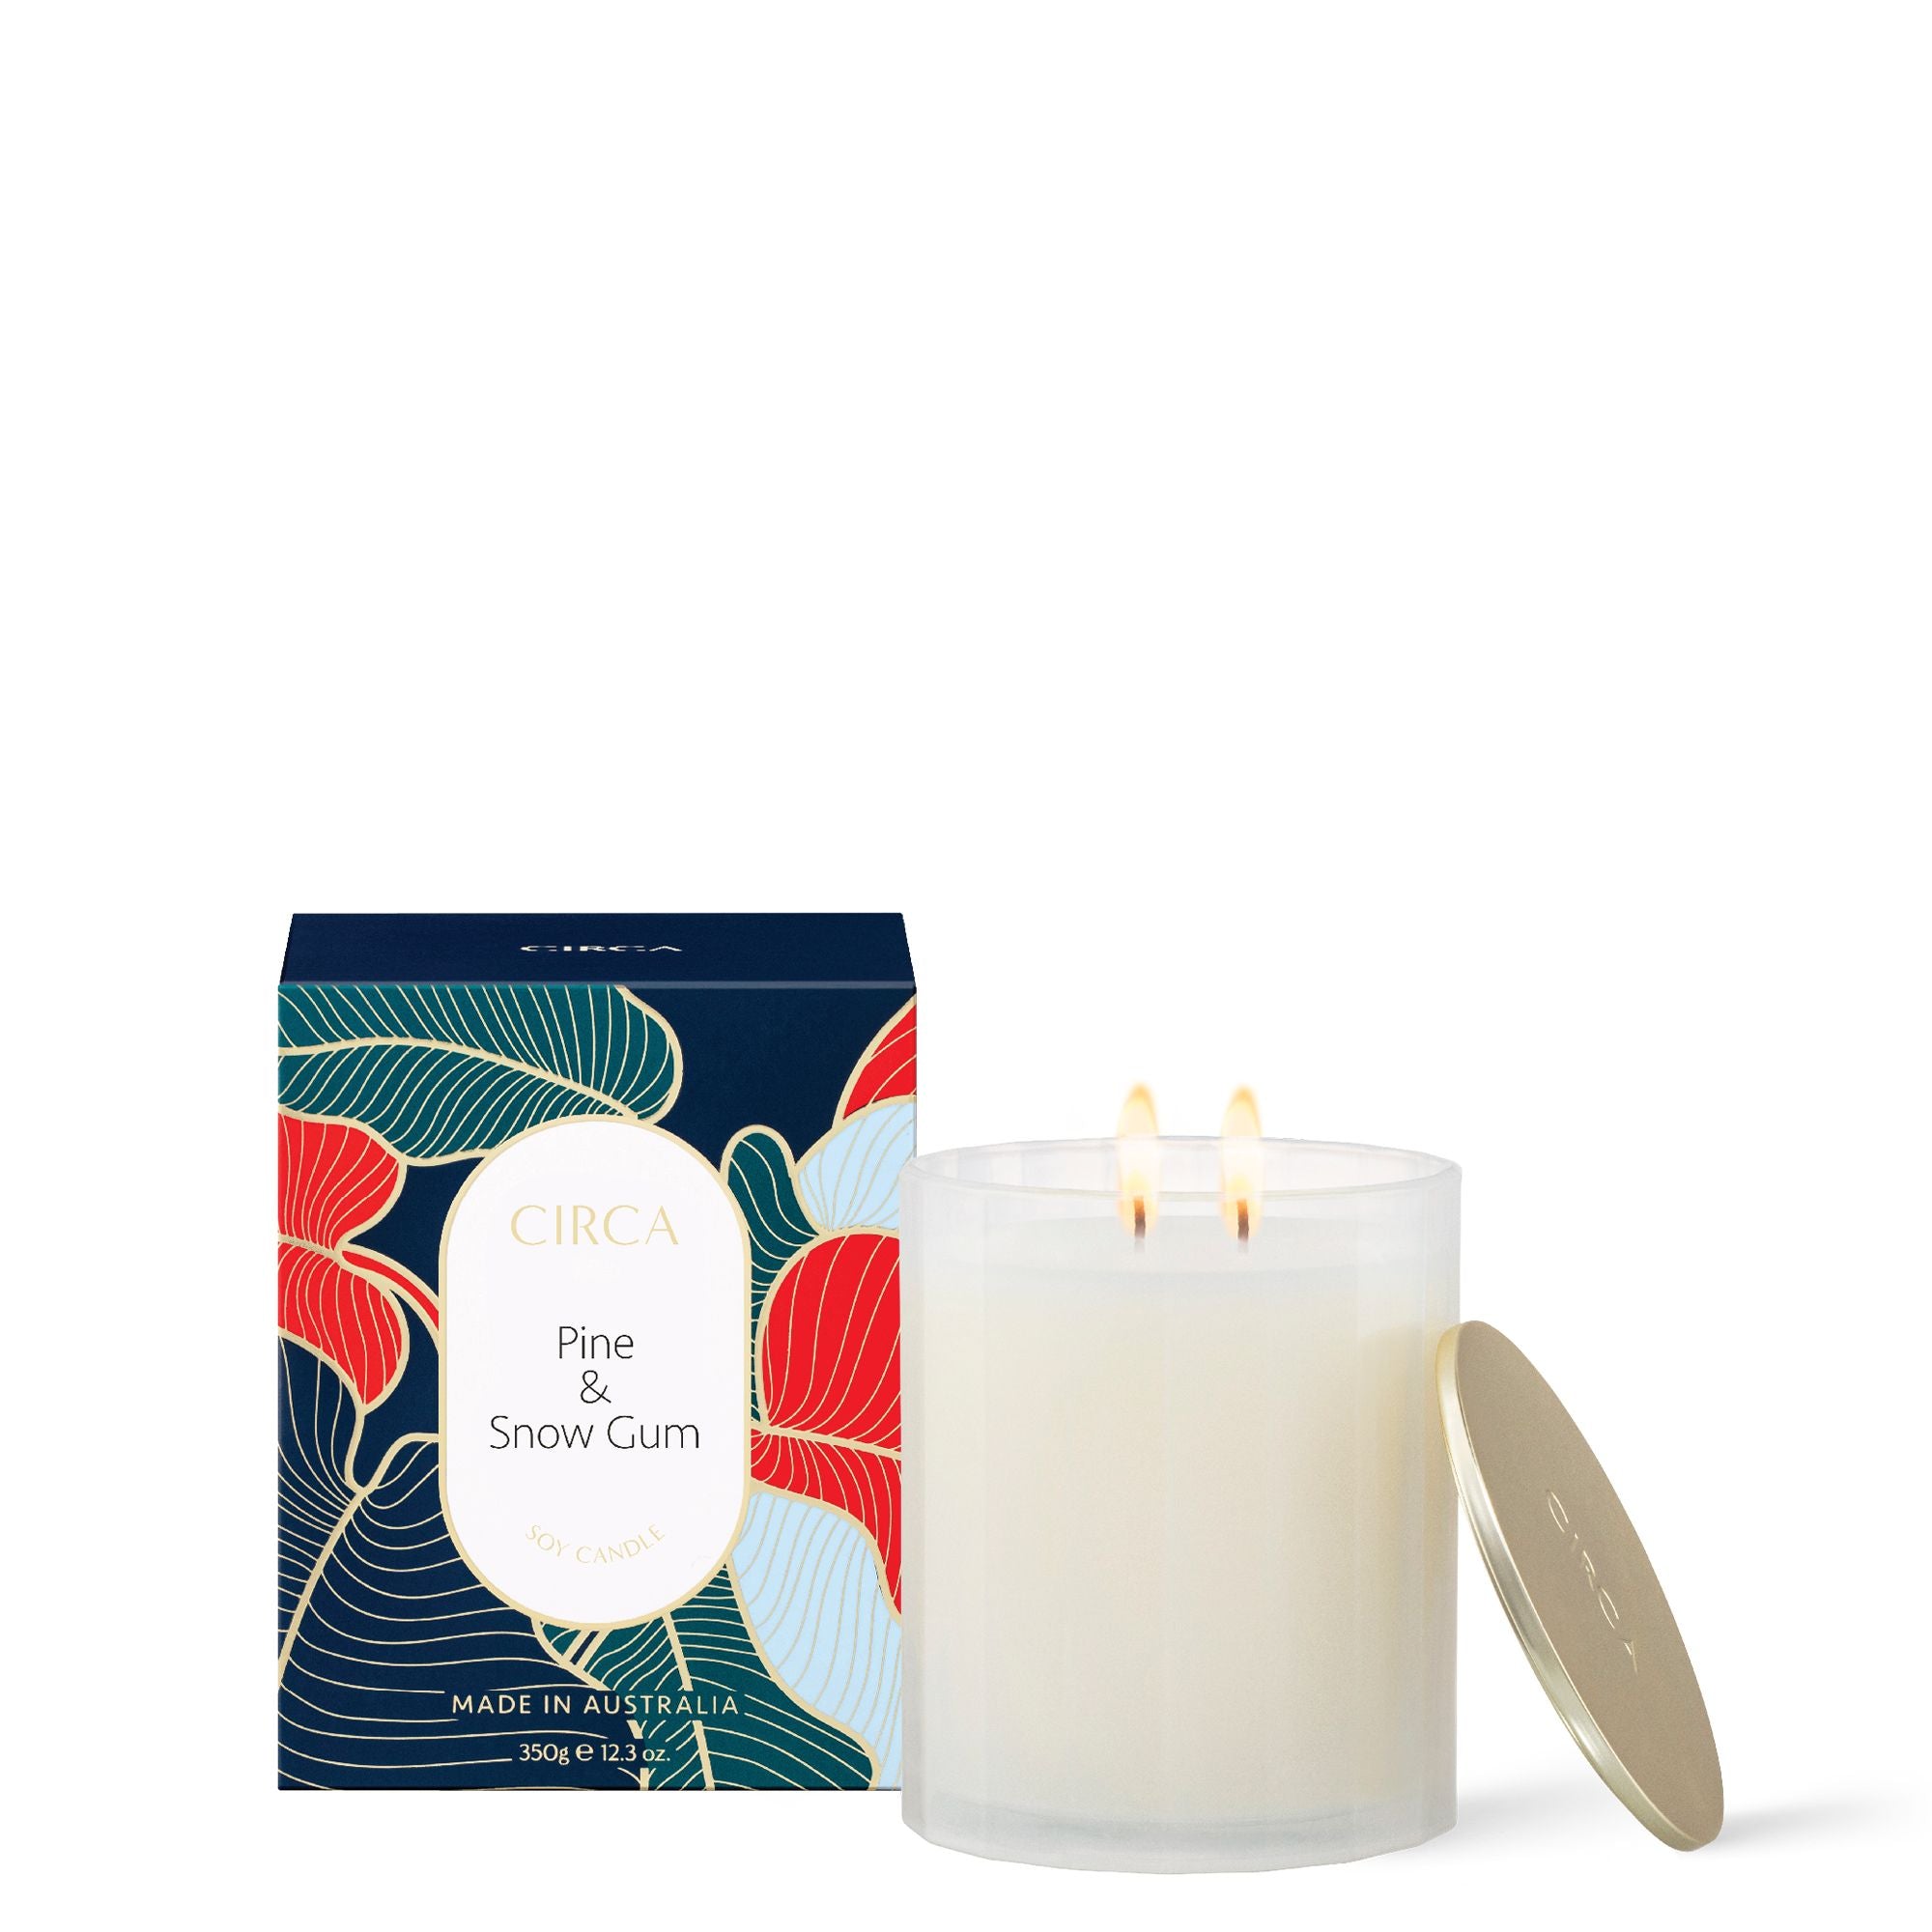 Pine & Snowgum Scented Soy Candle 350g